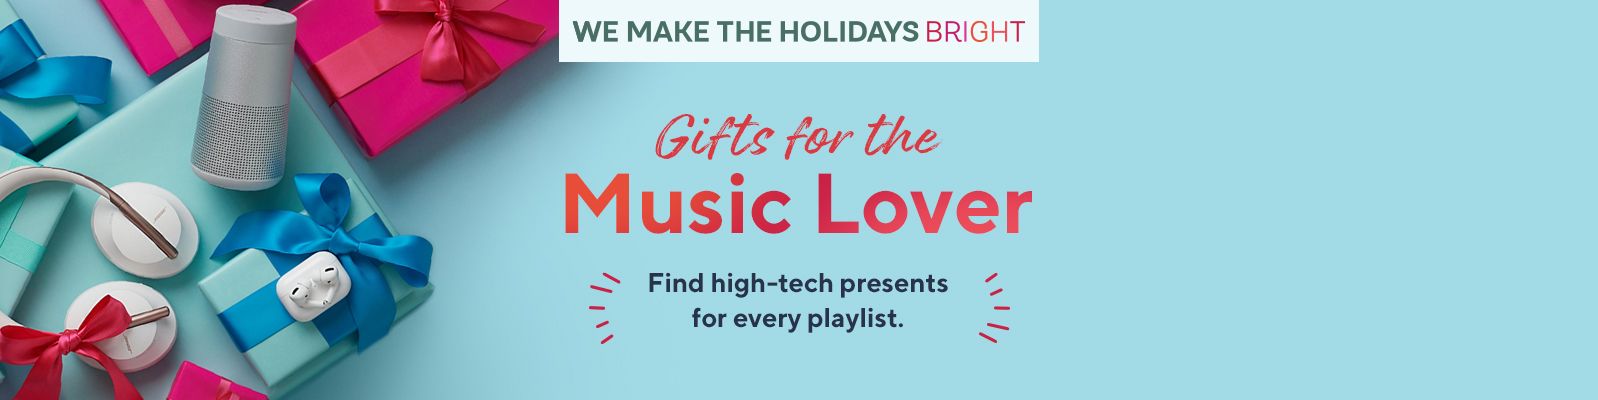 We Make the Holidays Bright - Gifts for the Music Lover - Find high-tech presents for every playlist. 